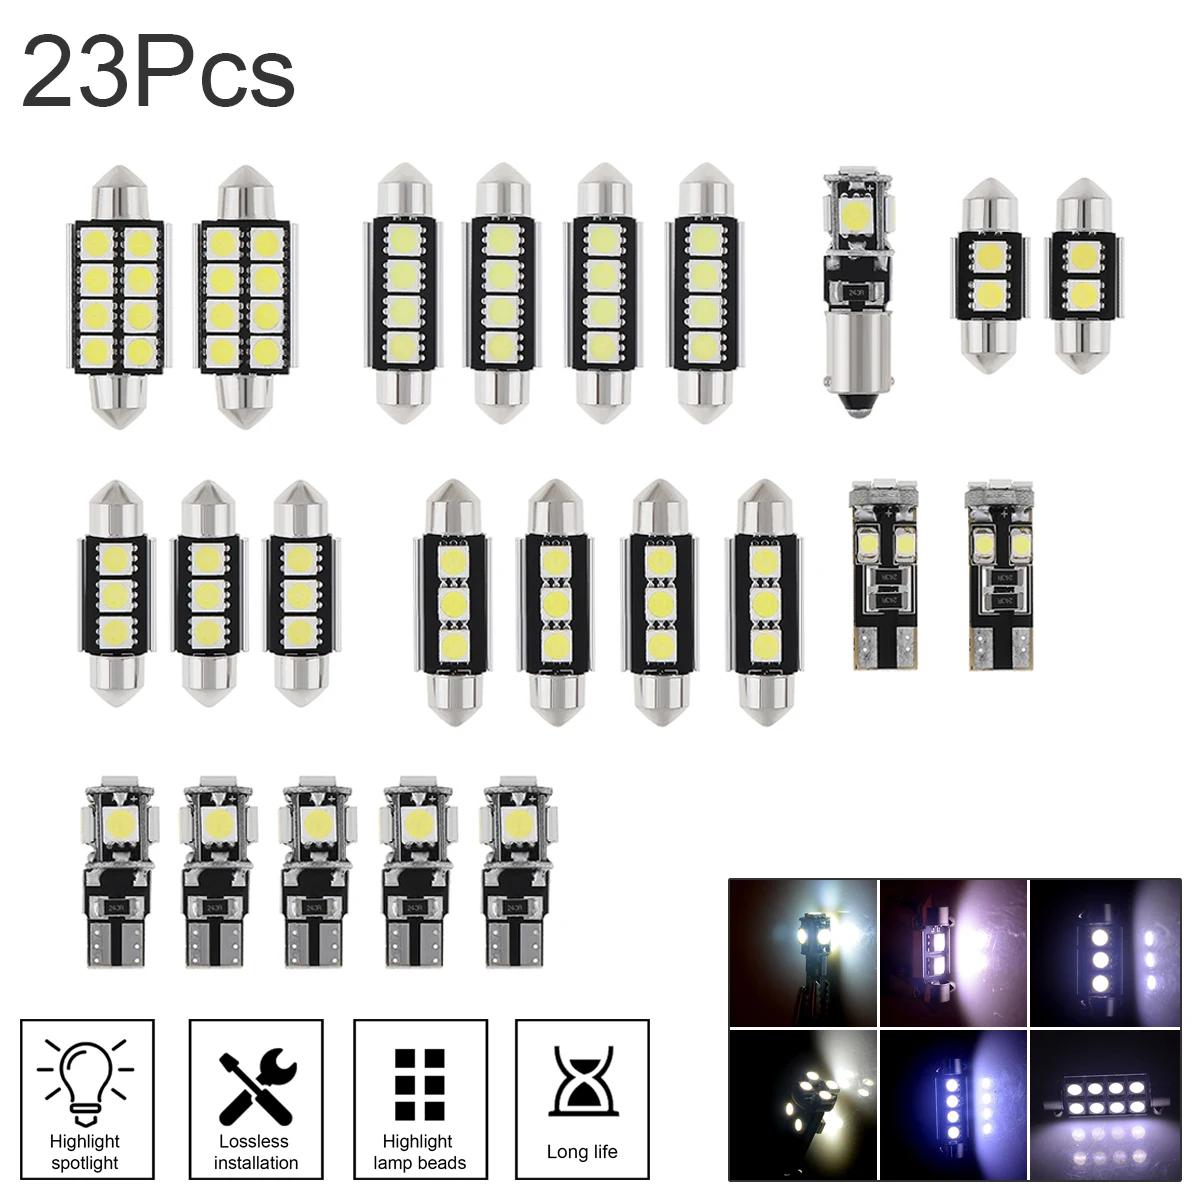 

23pcs T10 5050 W5W 6000K 600Lm White Color Canbus LED Car Interior Inside Light Dome Trunk Map License Plate Lamp Bulbs for Car